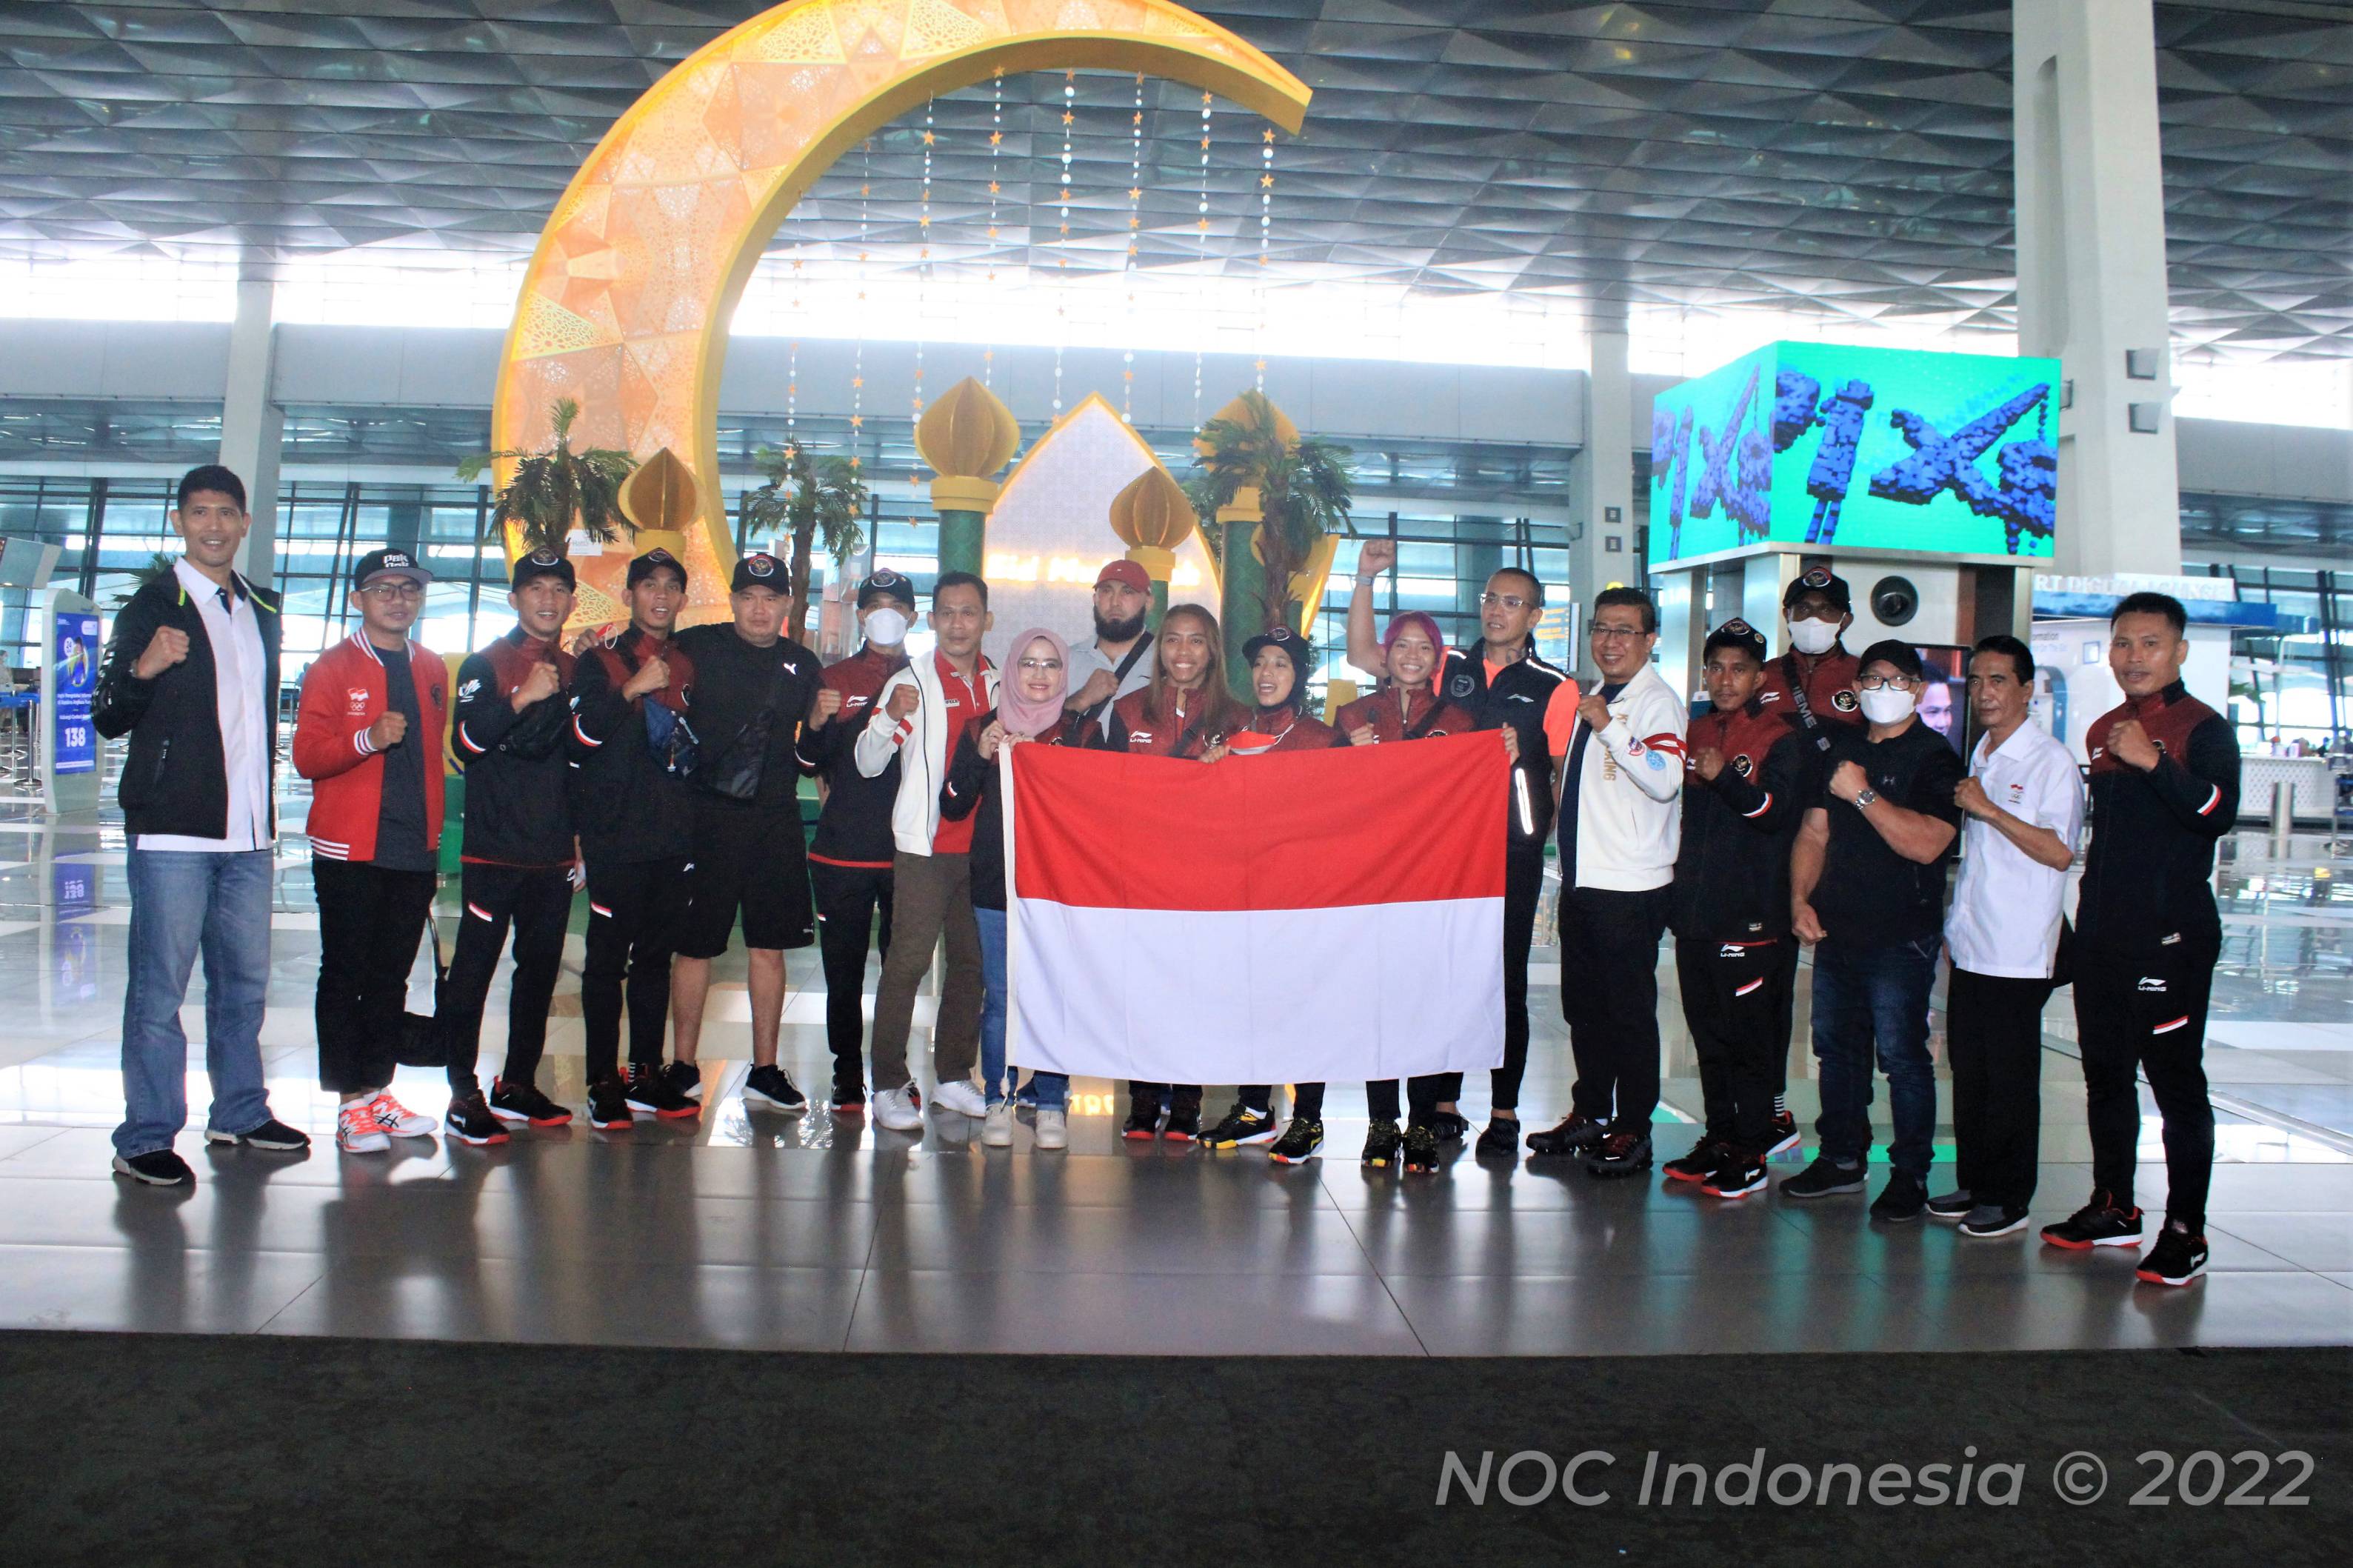 Indonesia Olympic Commitee - Kickboxing with a point to prove at SEA Games